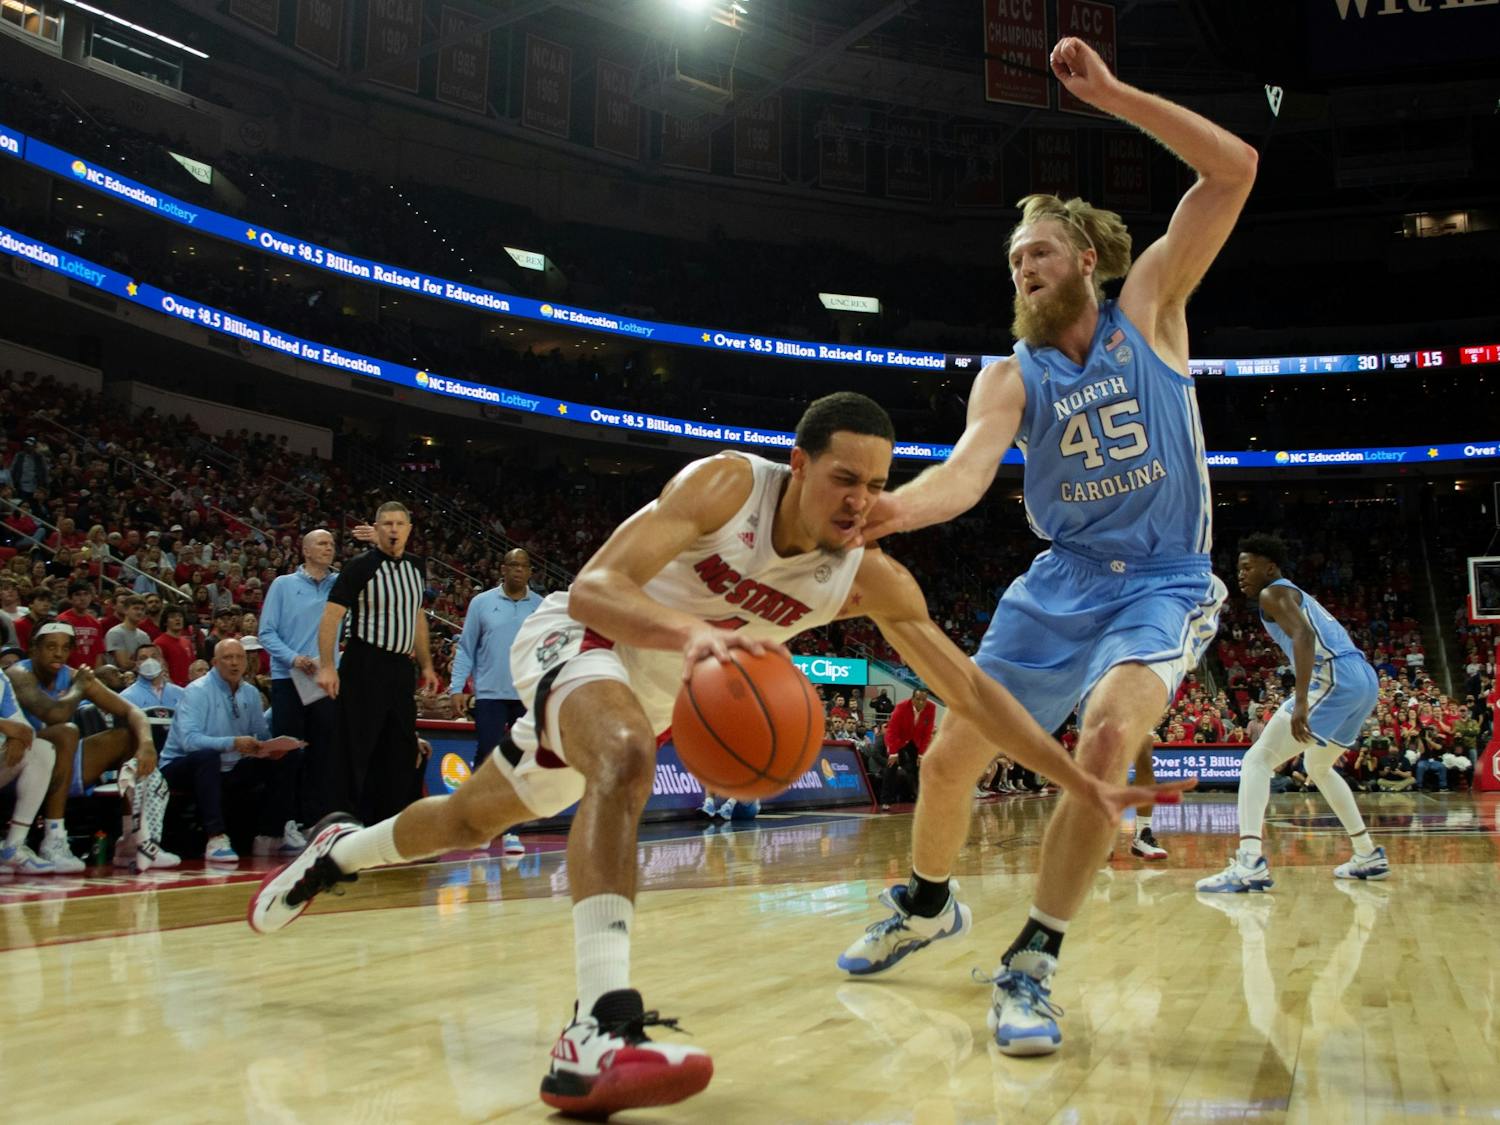 Graduate forward Brady Manek (45) defends against NC State's Jericole Hellems (4) in the first half of the game against NC State game at the PNC Arena in Raleigh, NC on Feb. 26, 2022.